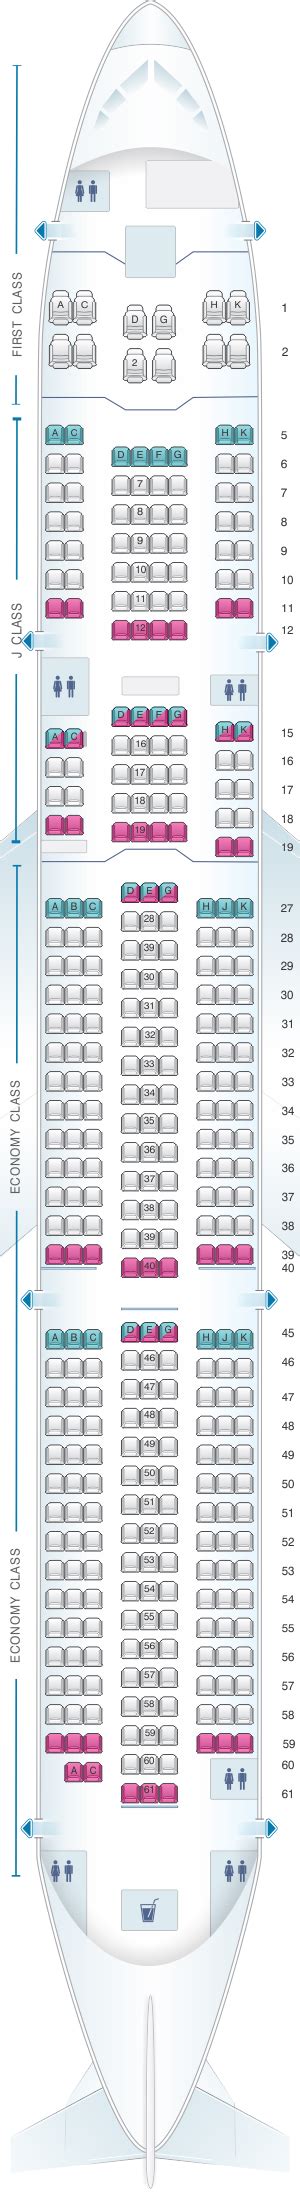 Airbus A350 Seat Map